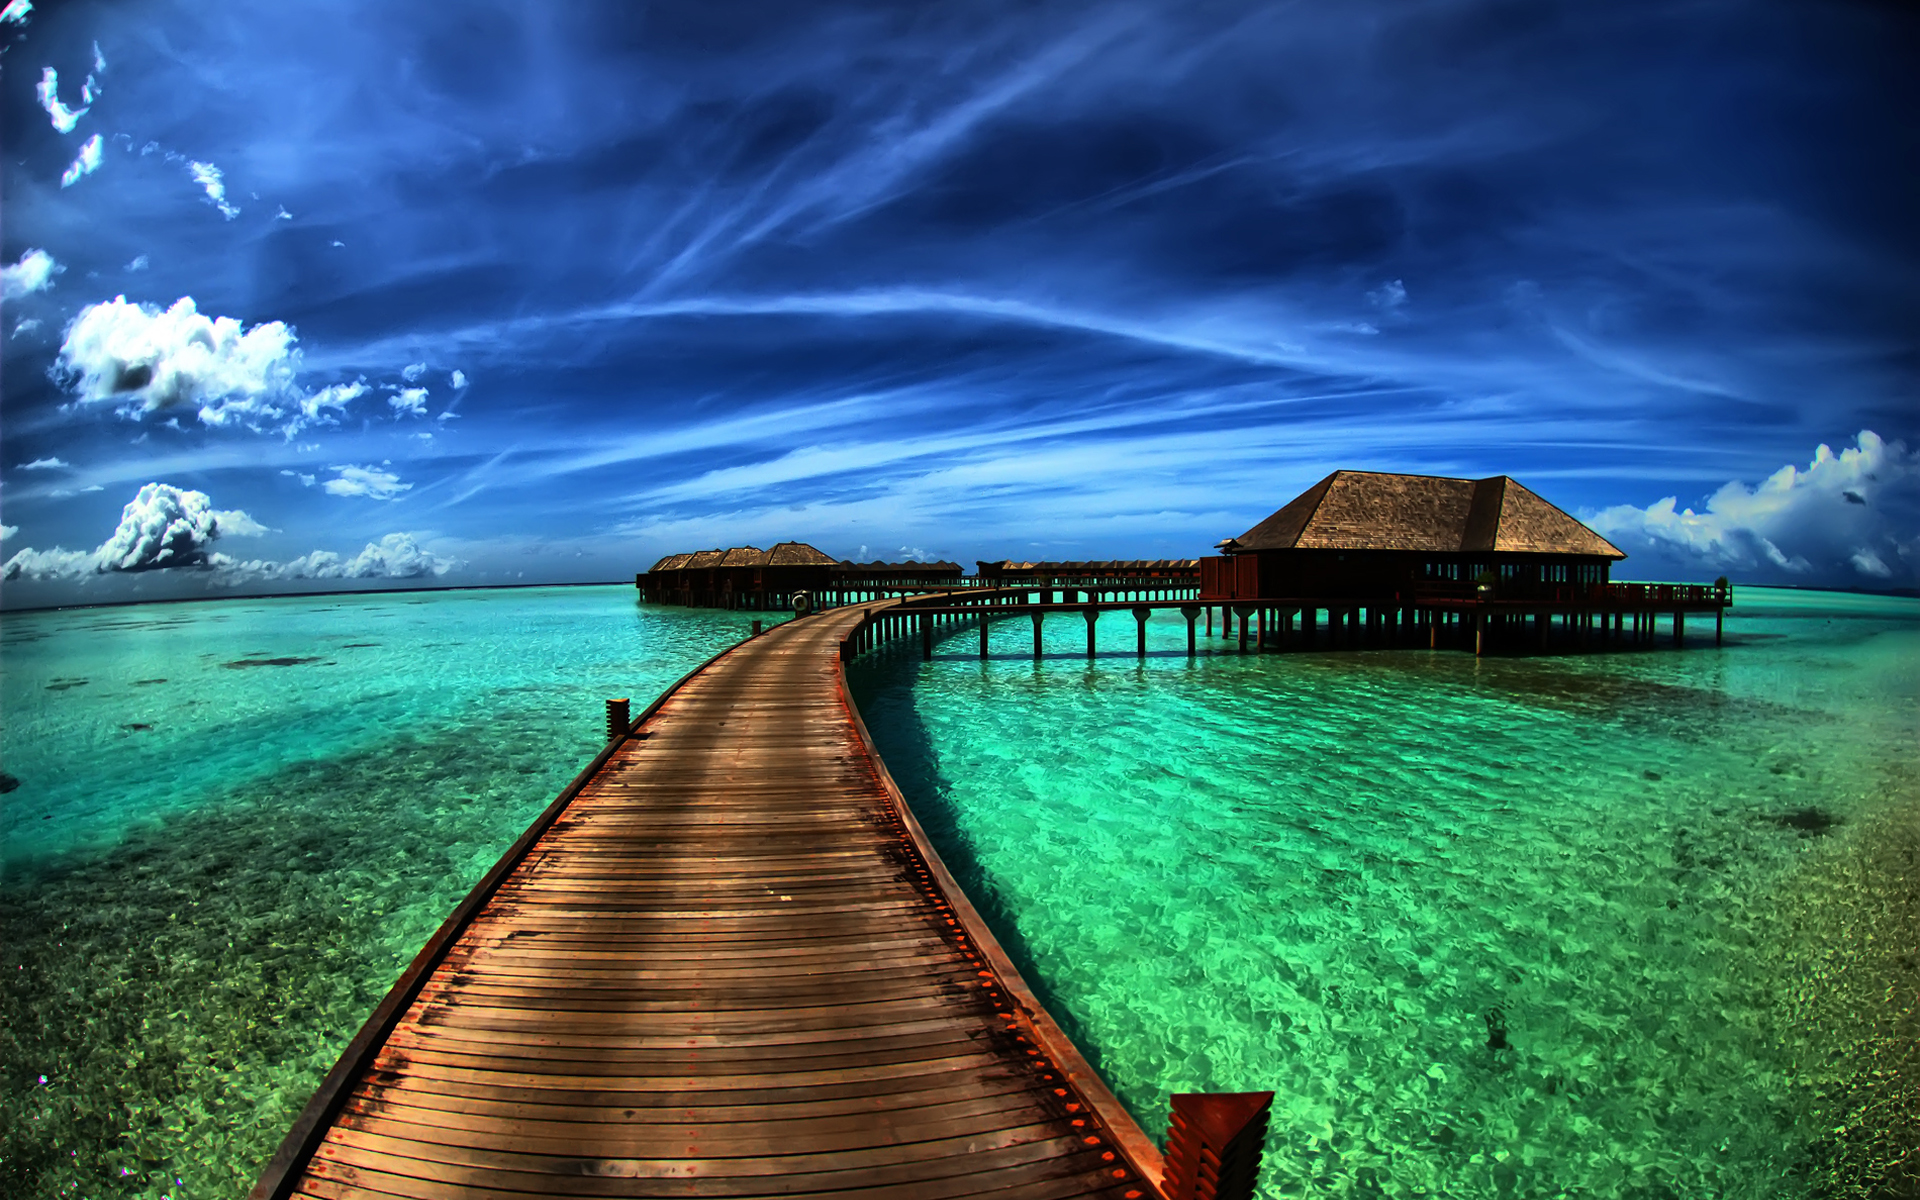 High Definition BackgroundHD Wallpaper